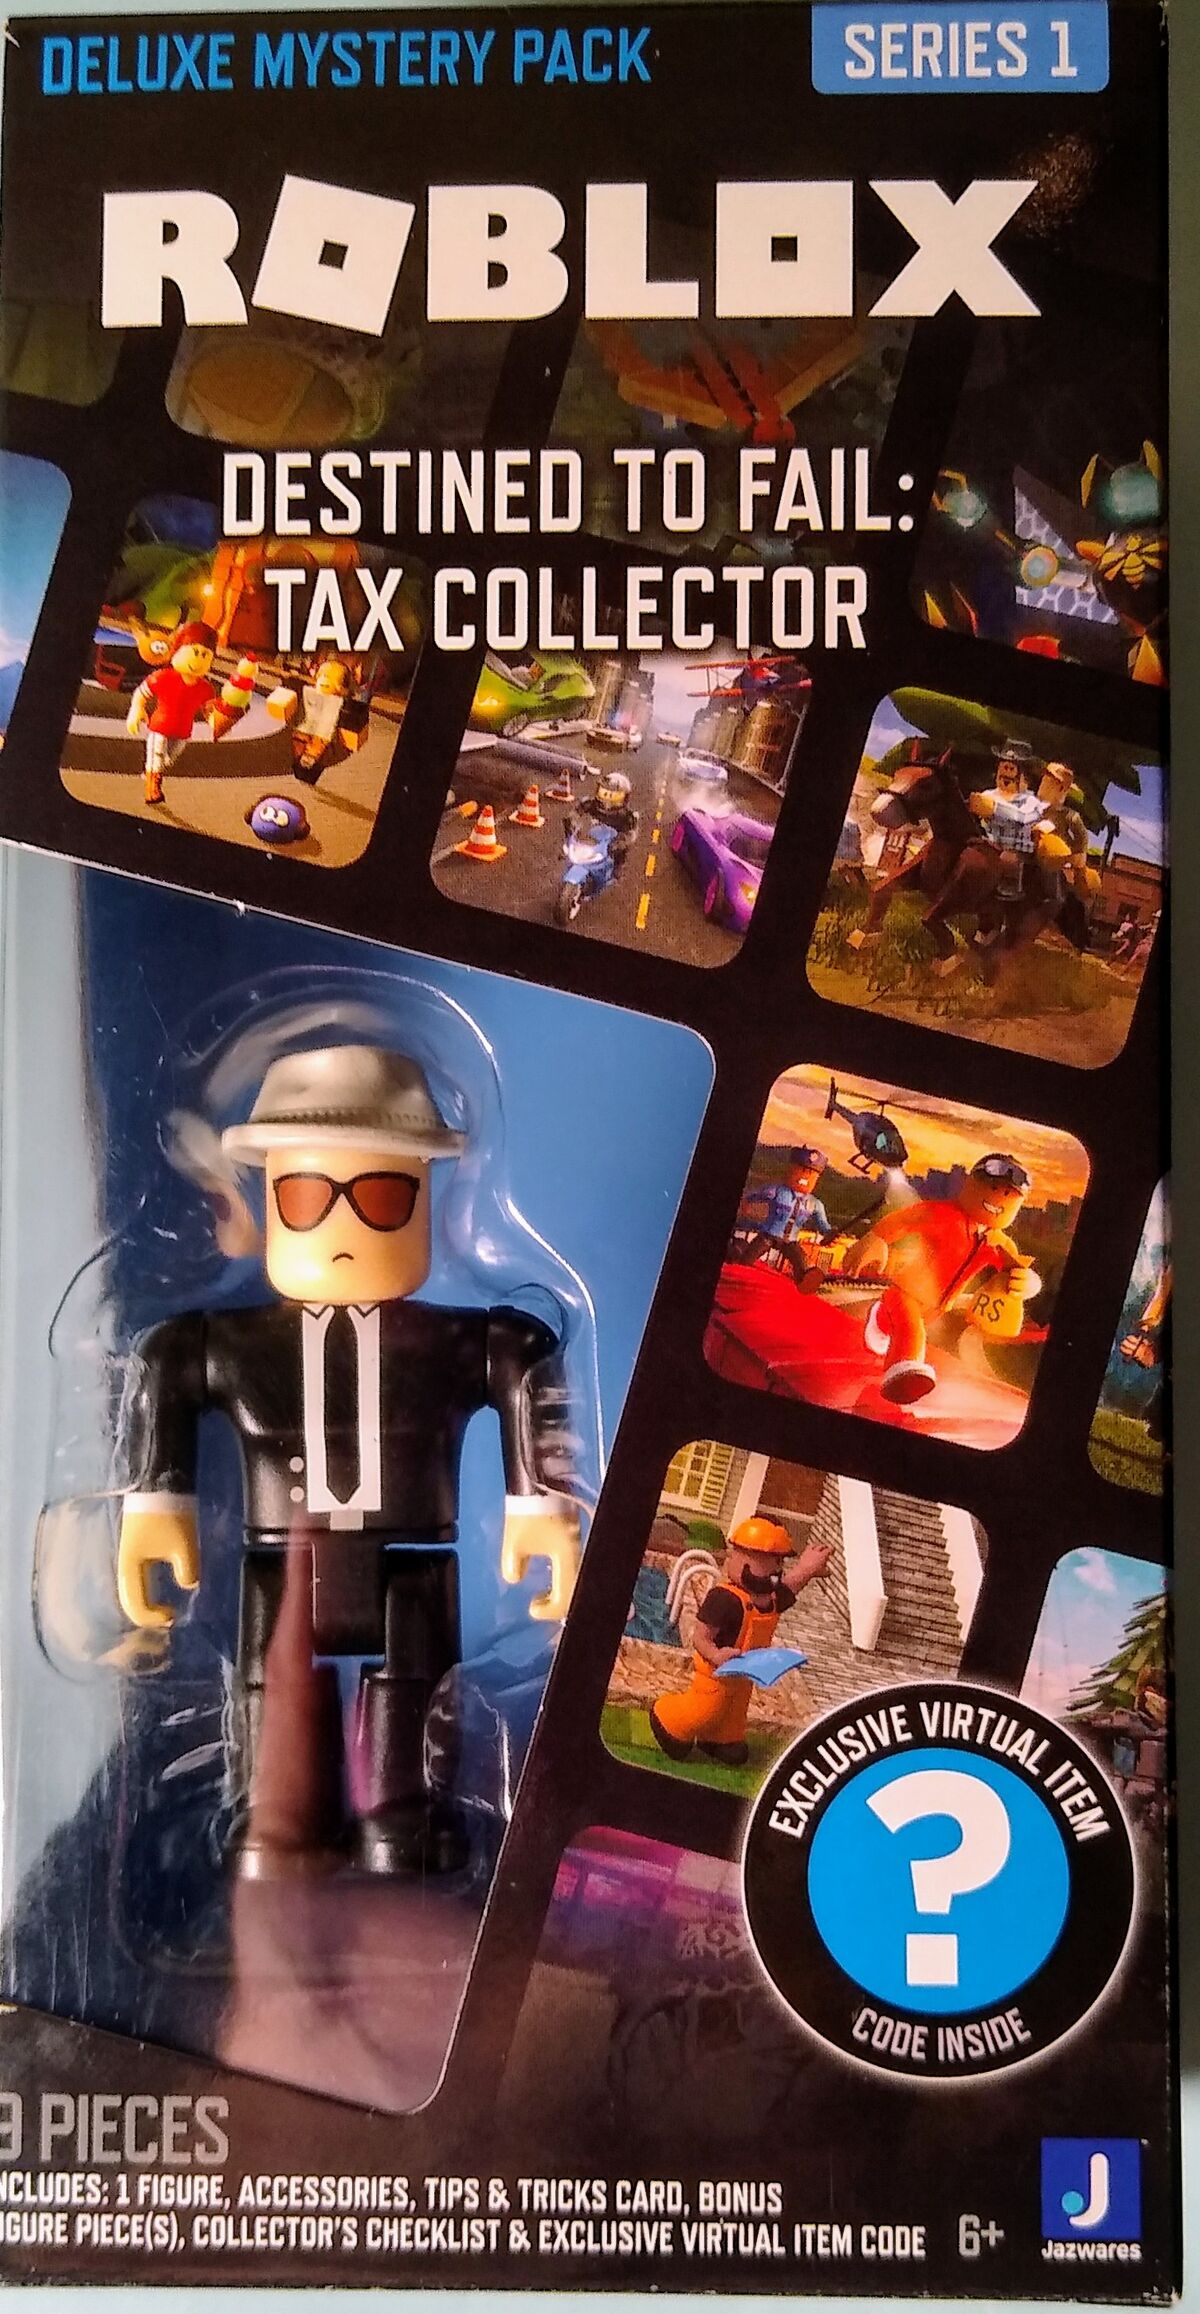 Roblox Action Collection - Destined to Fail: Tax Collector Deluxe